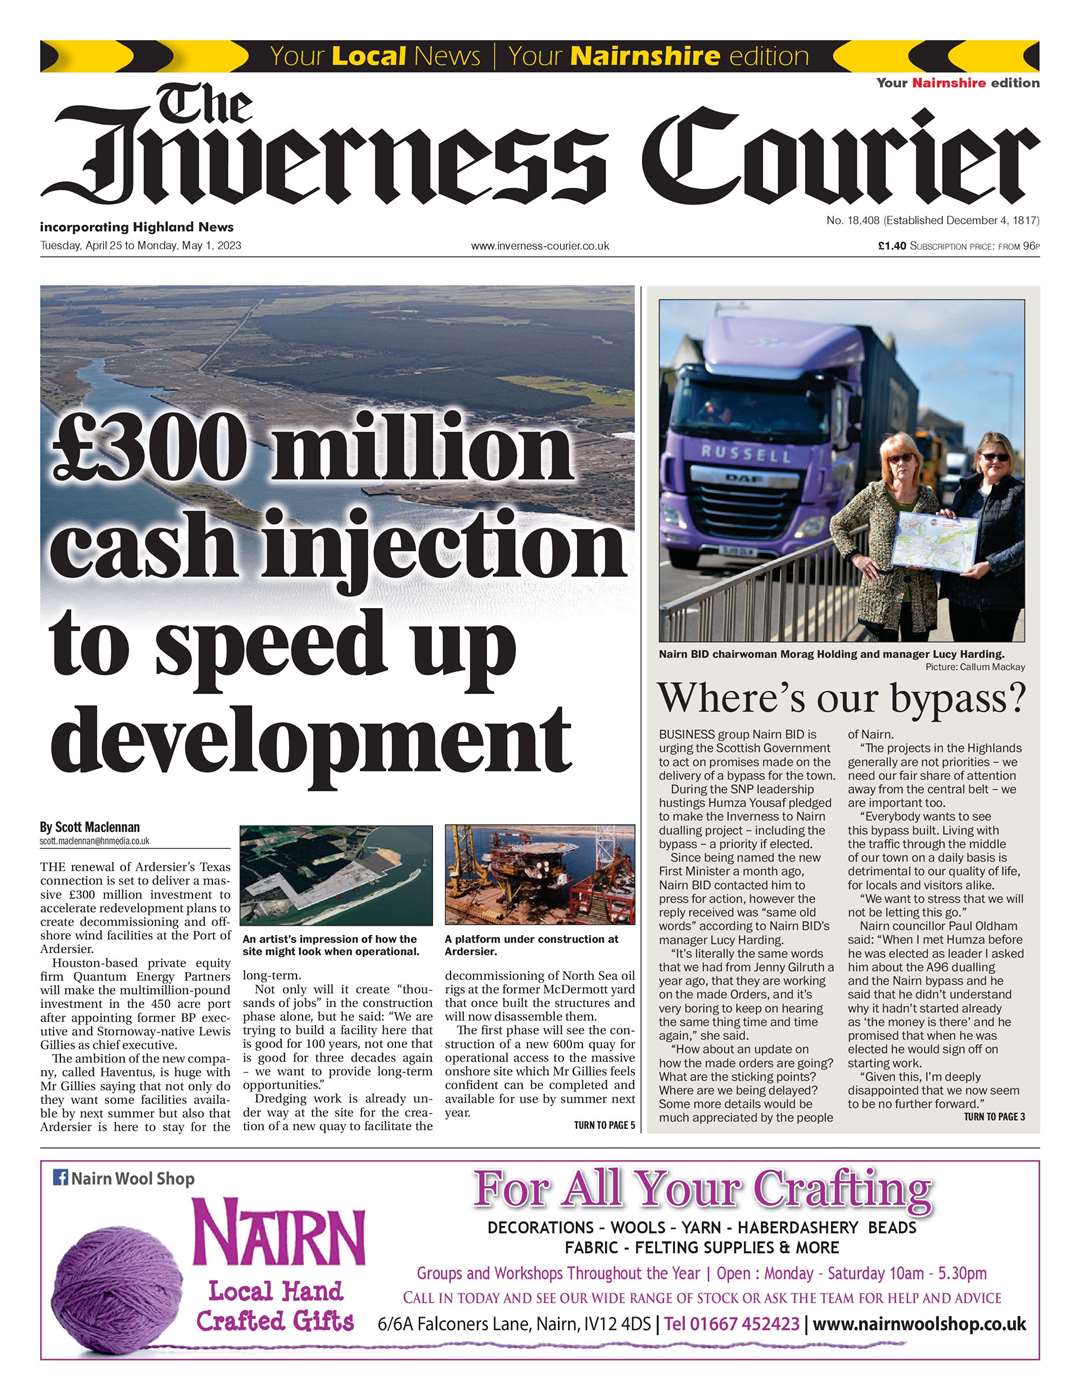 The Inverness Courier (Nairnshire edition), April 25, front page.